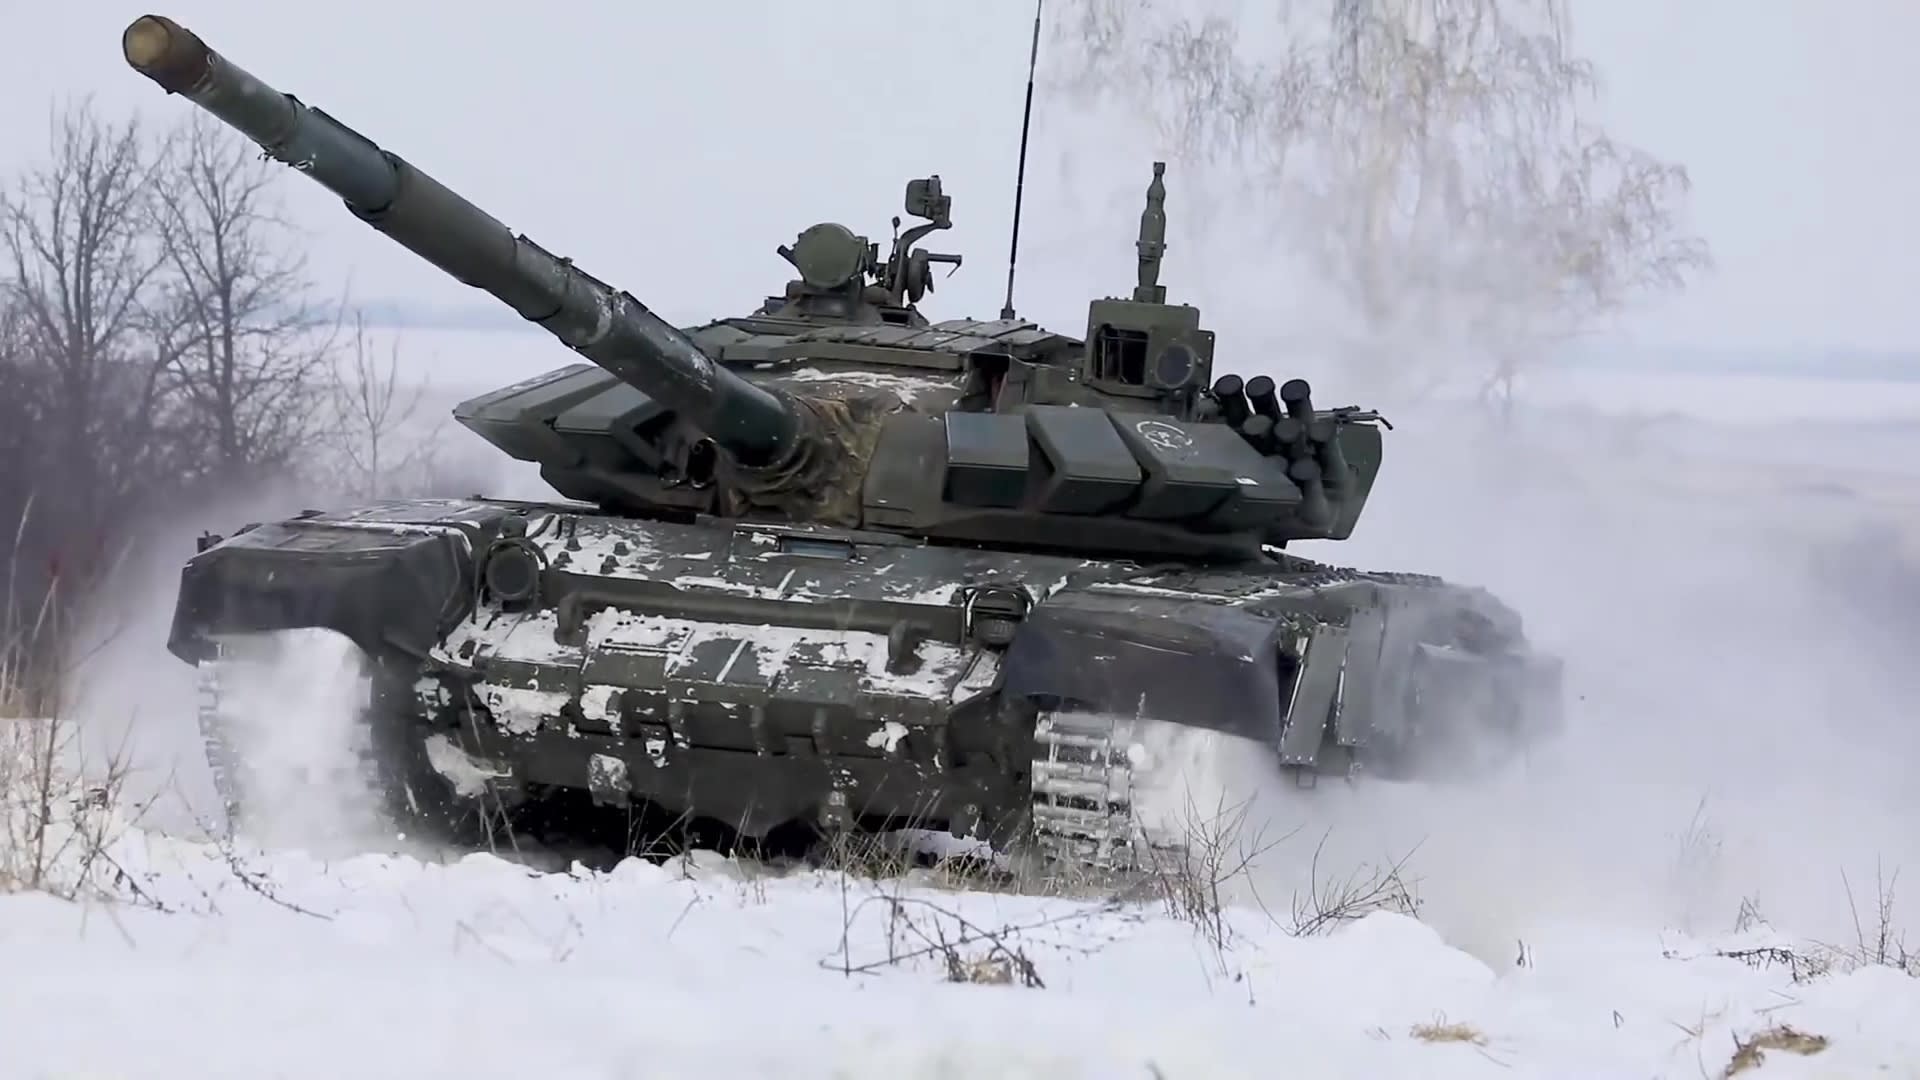 T-72B3 Main Battle Tanks of Russian Army take part in a military drill in St. Petersburg, Russia on February 14, 2022.